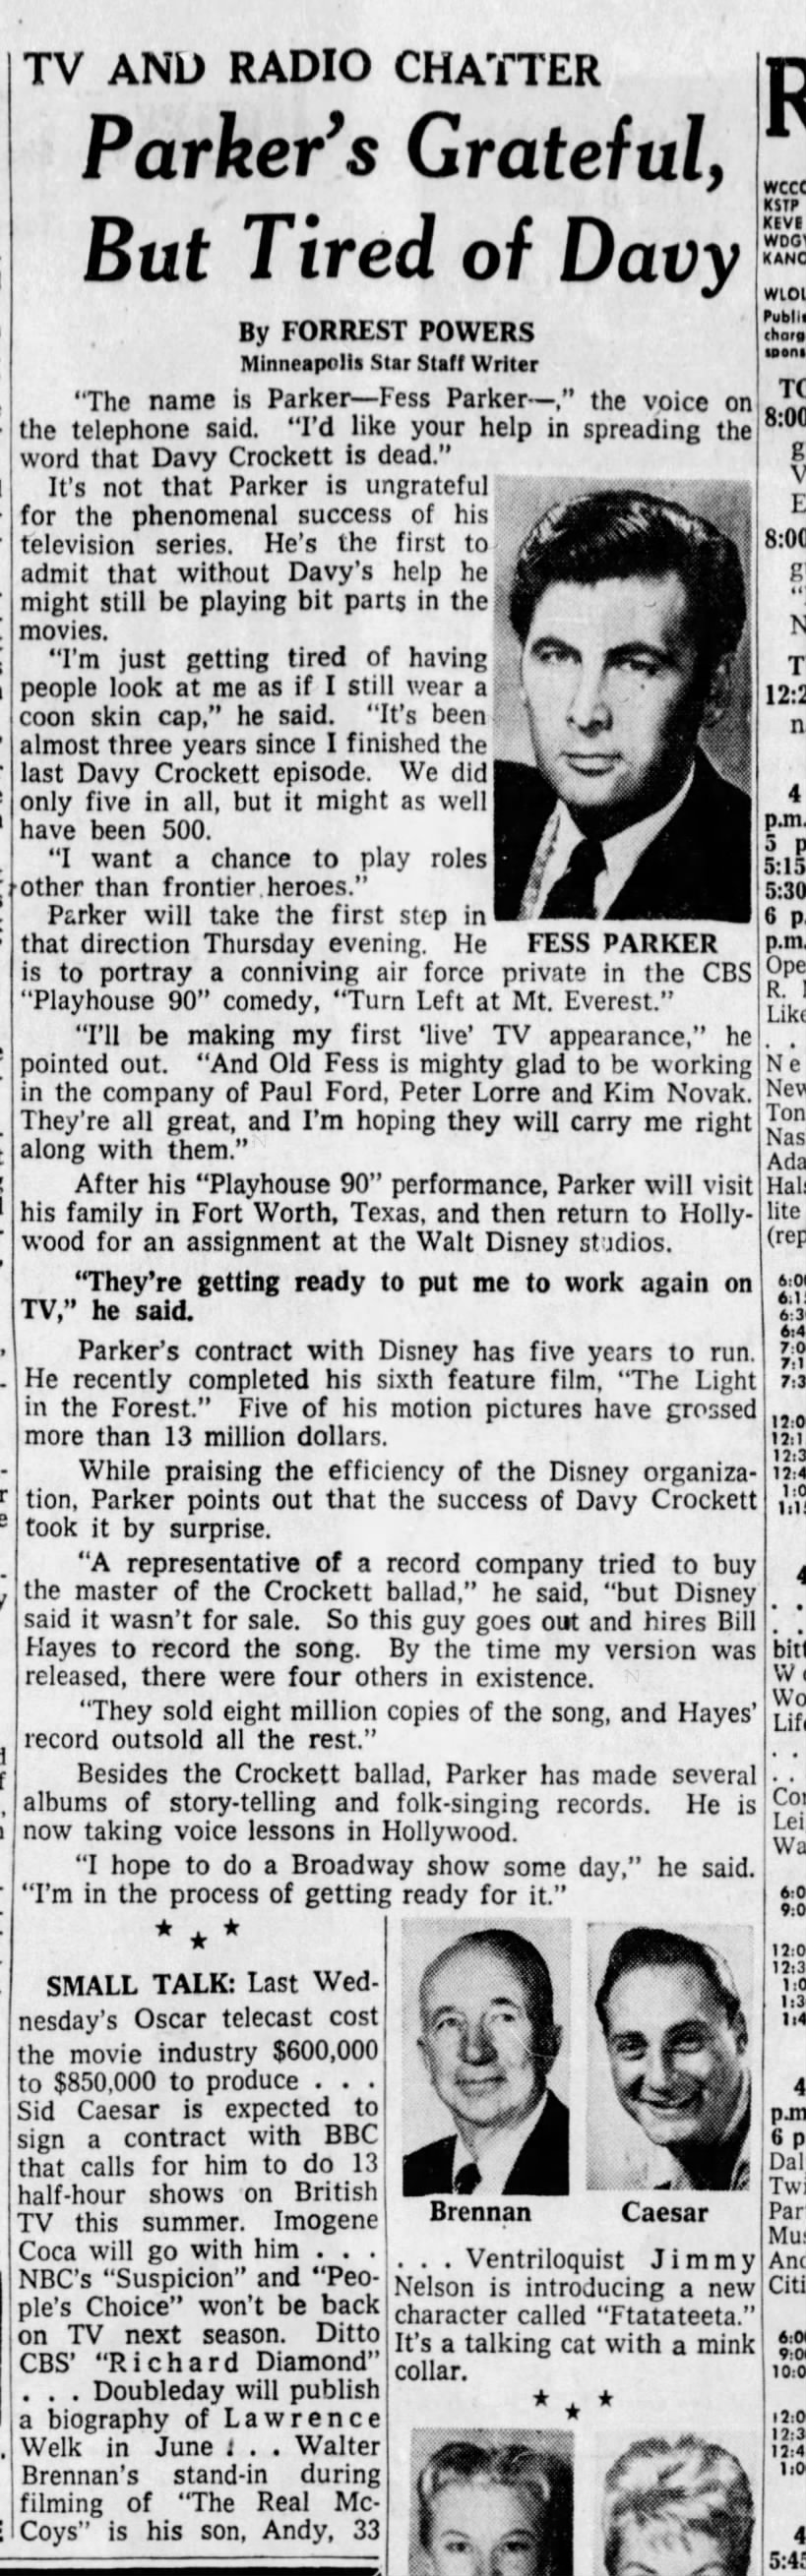 "TV and Radio Chatter," Minneapolis Star, 30 Mar 1958, 17.